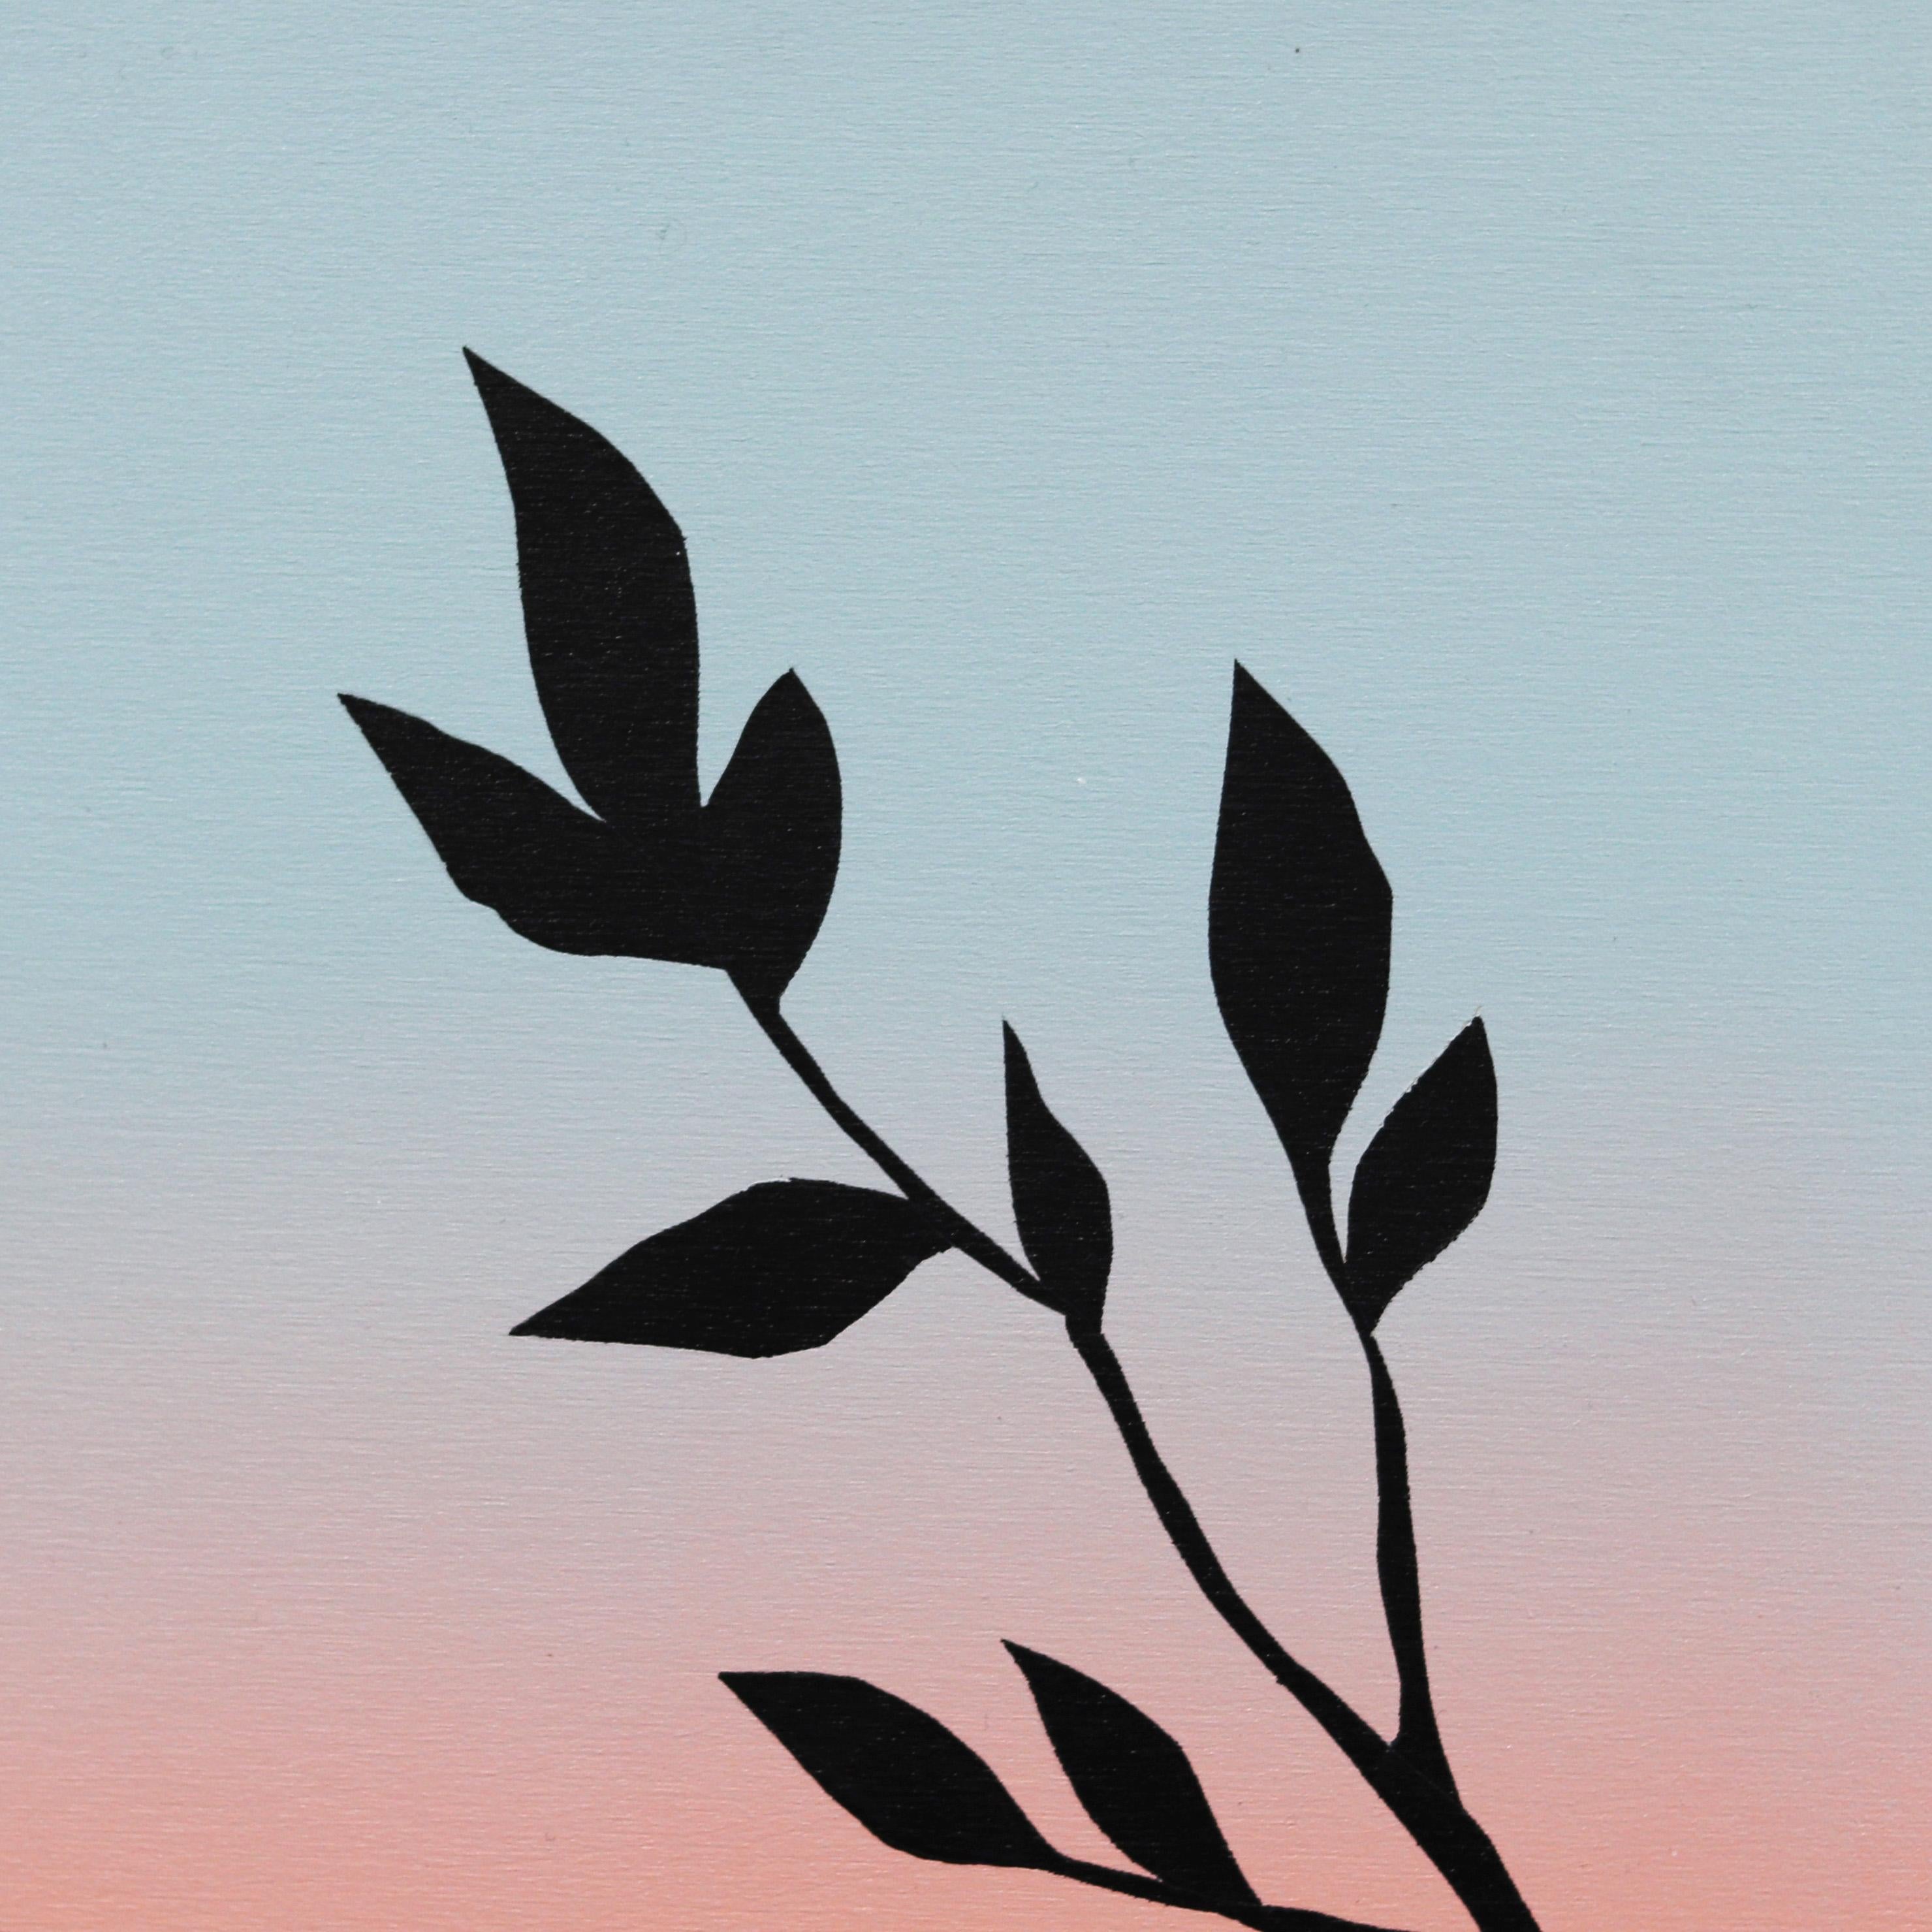 Leaving Town - Minimalist Scenic Landscape Painting 3